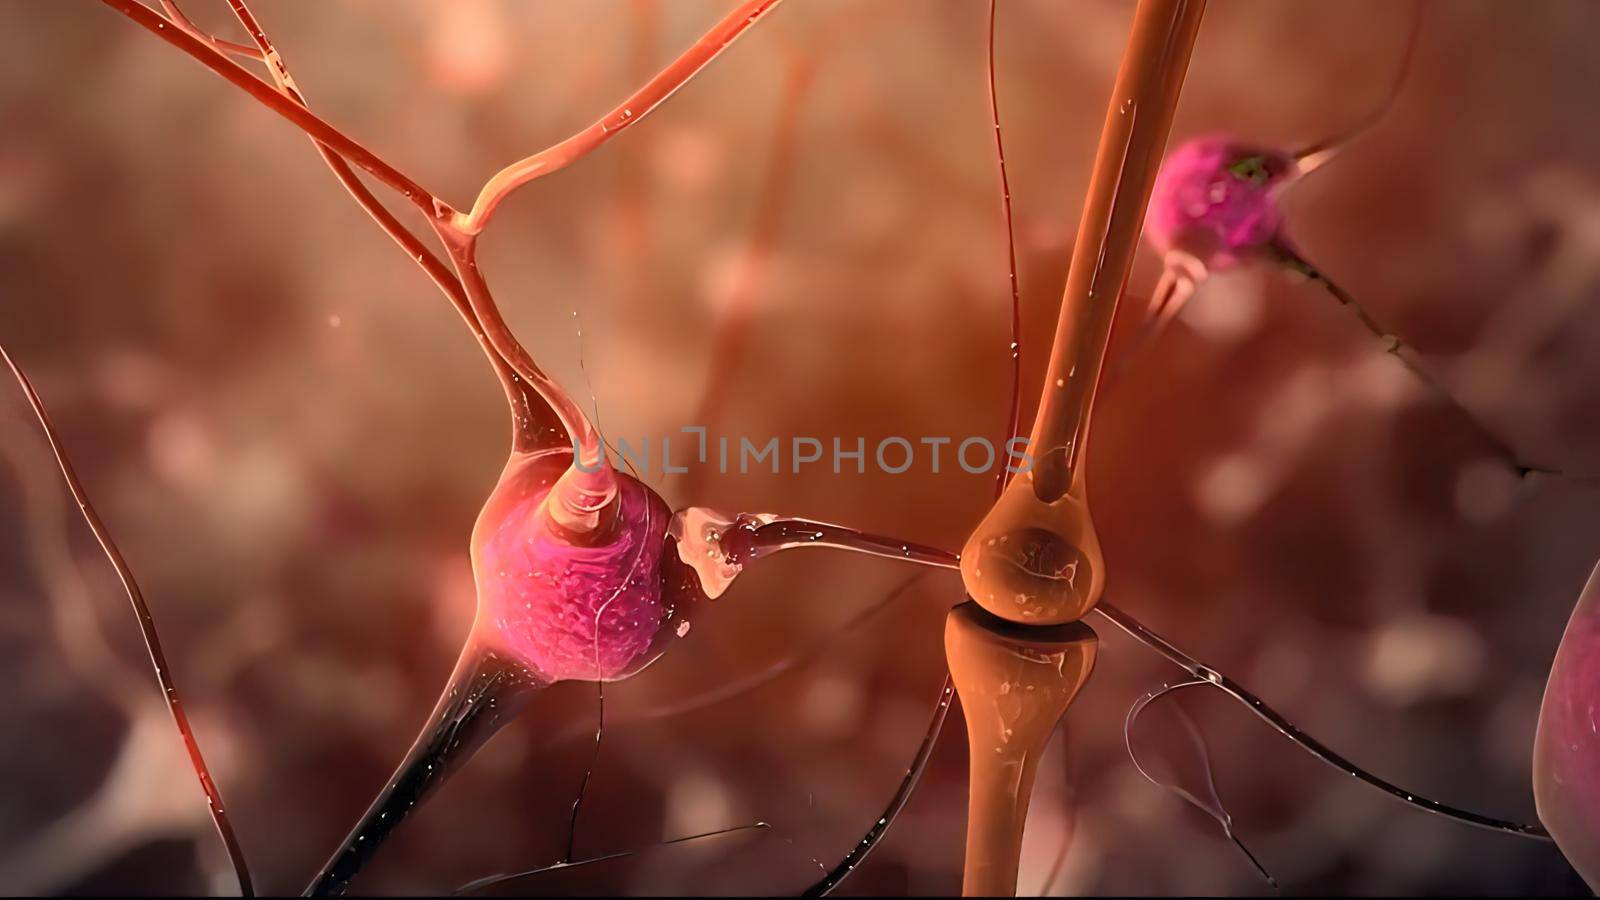 Neuron and synapses by creativepic